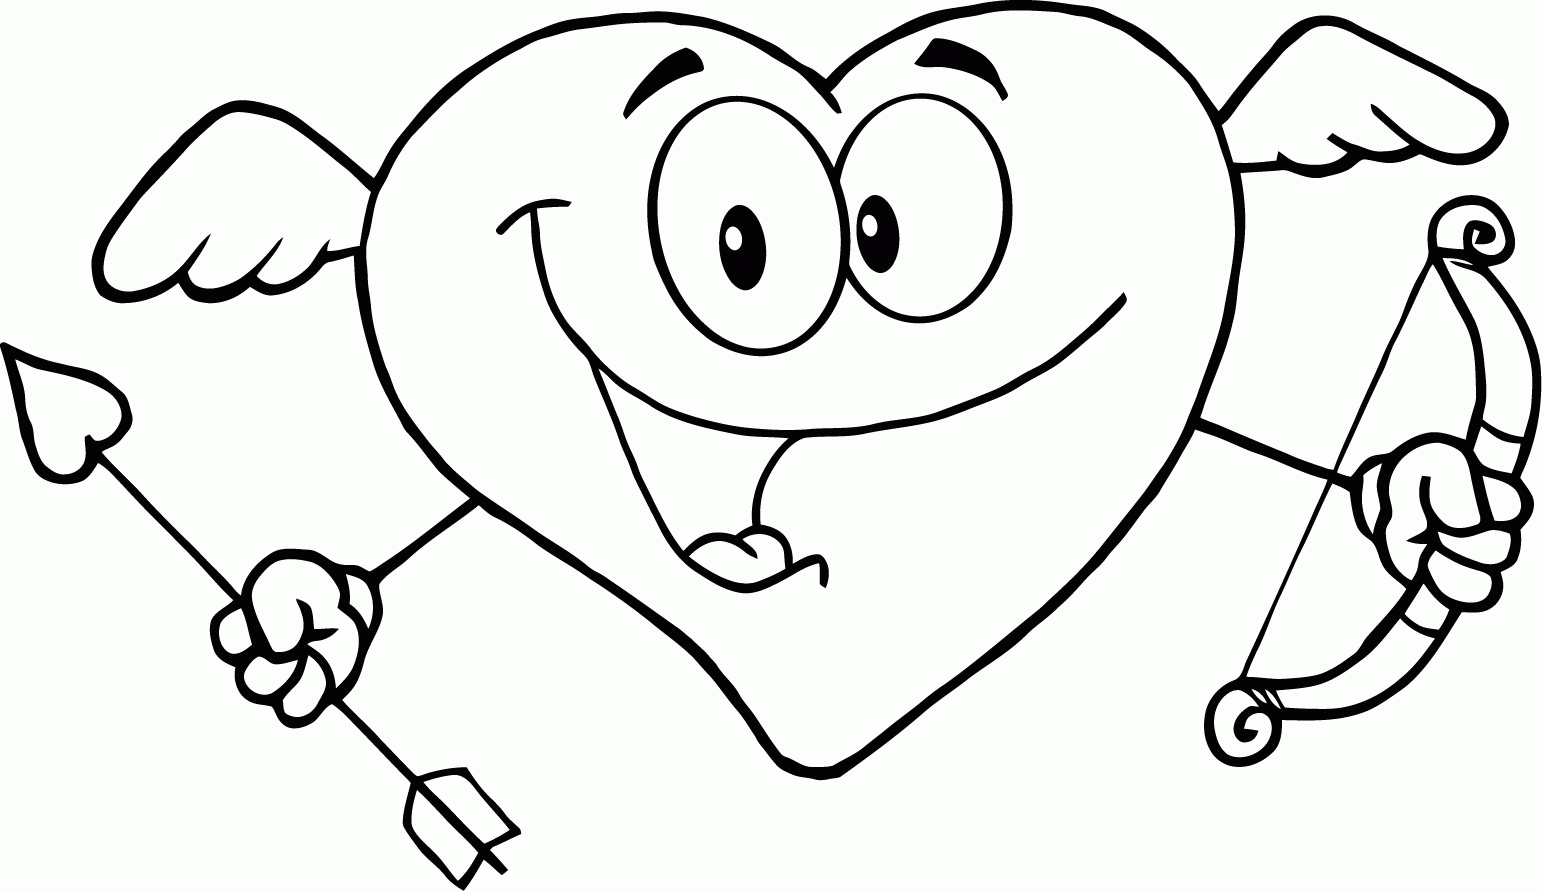 Heart Coloring Pages and Book | UniqueColoringPages